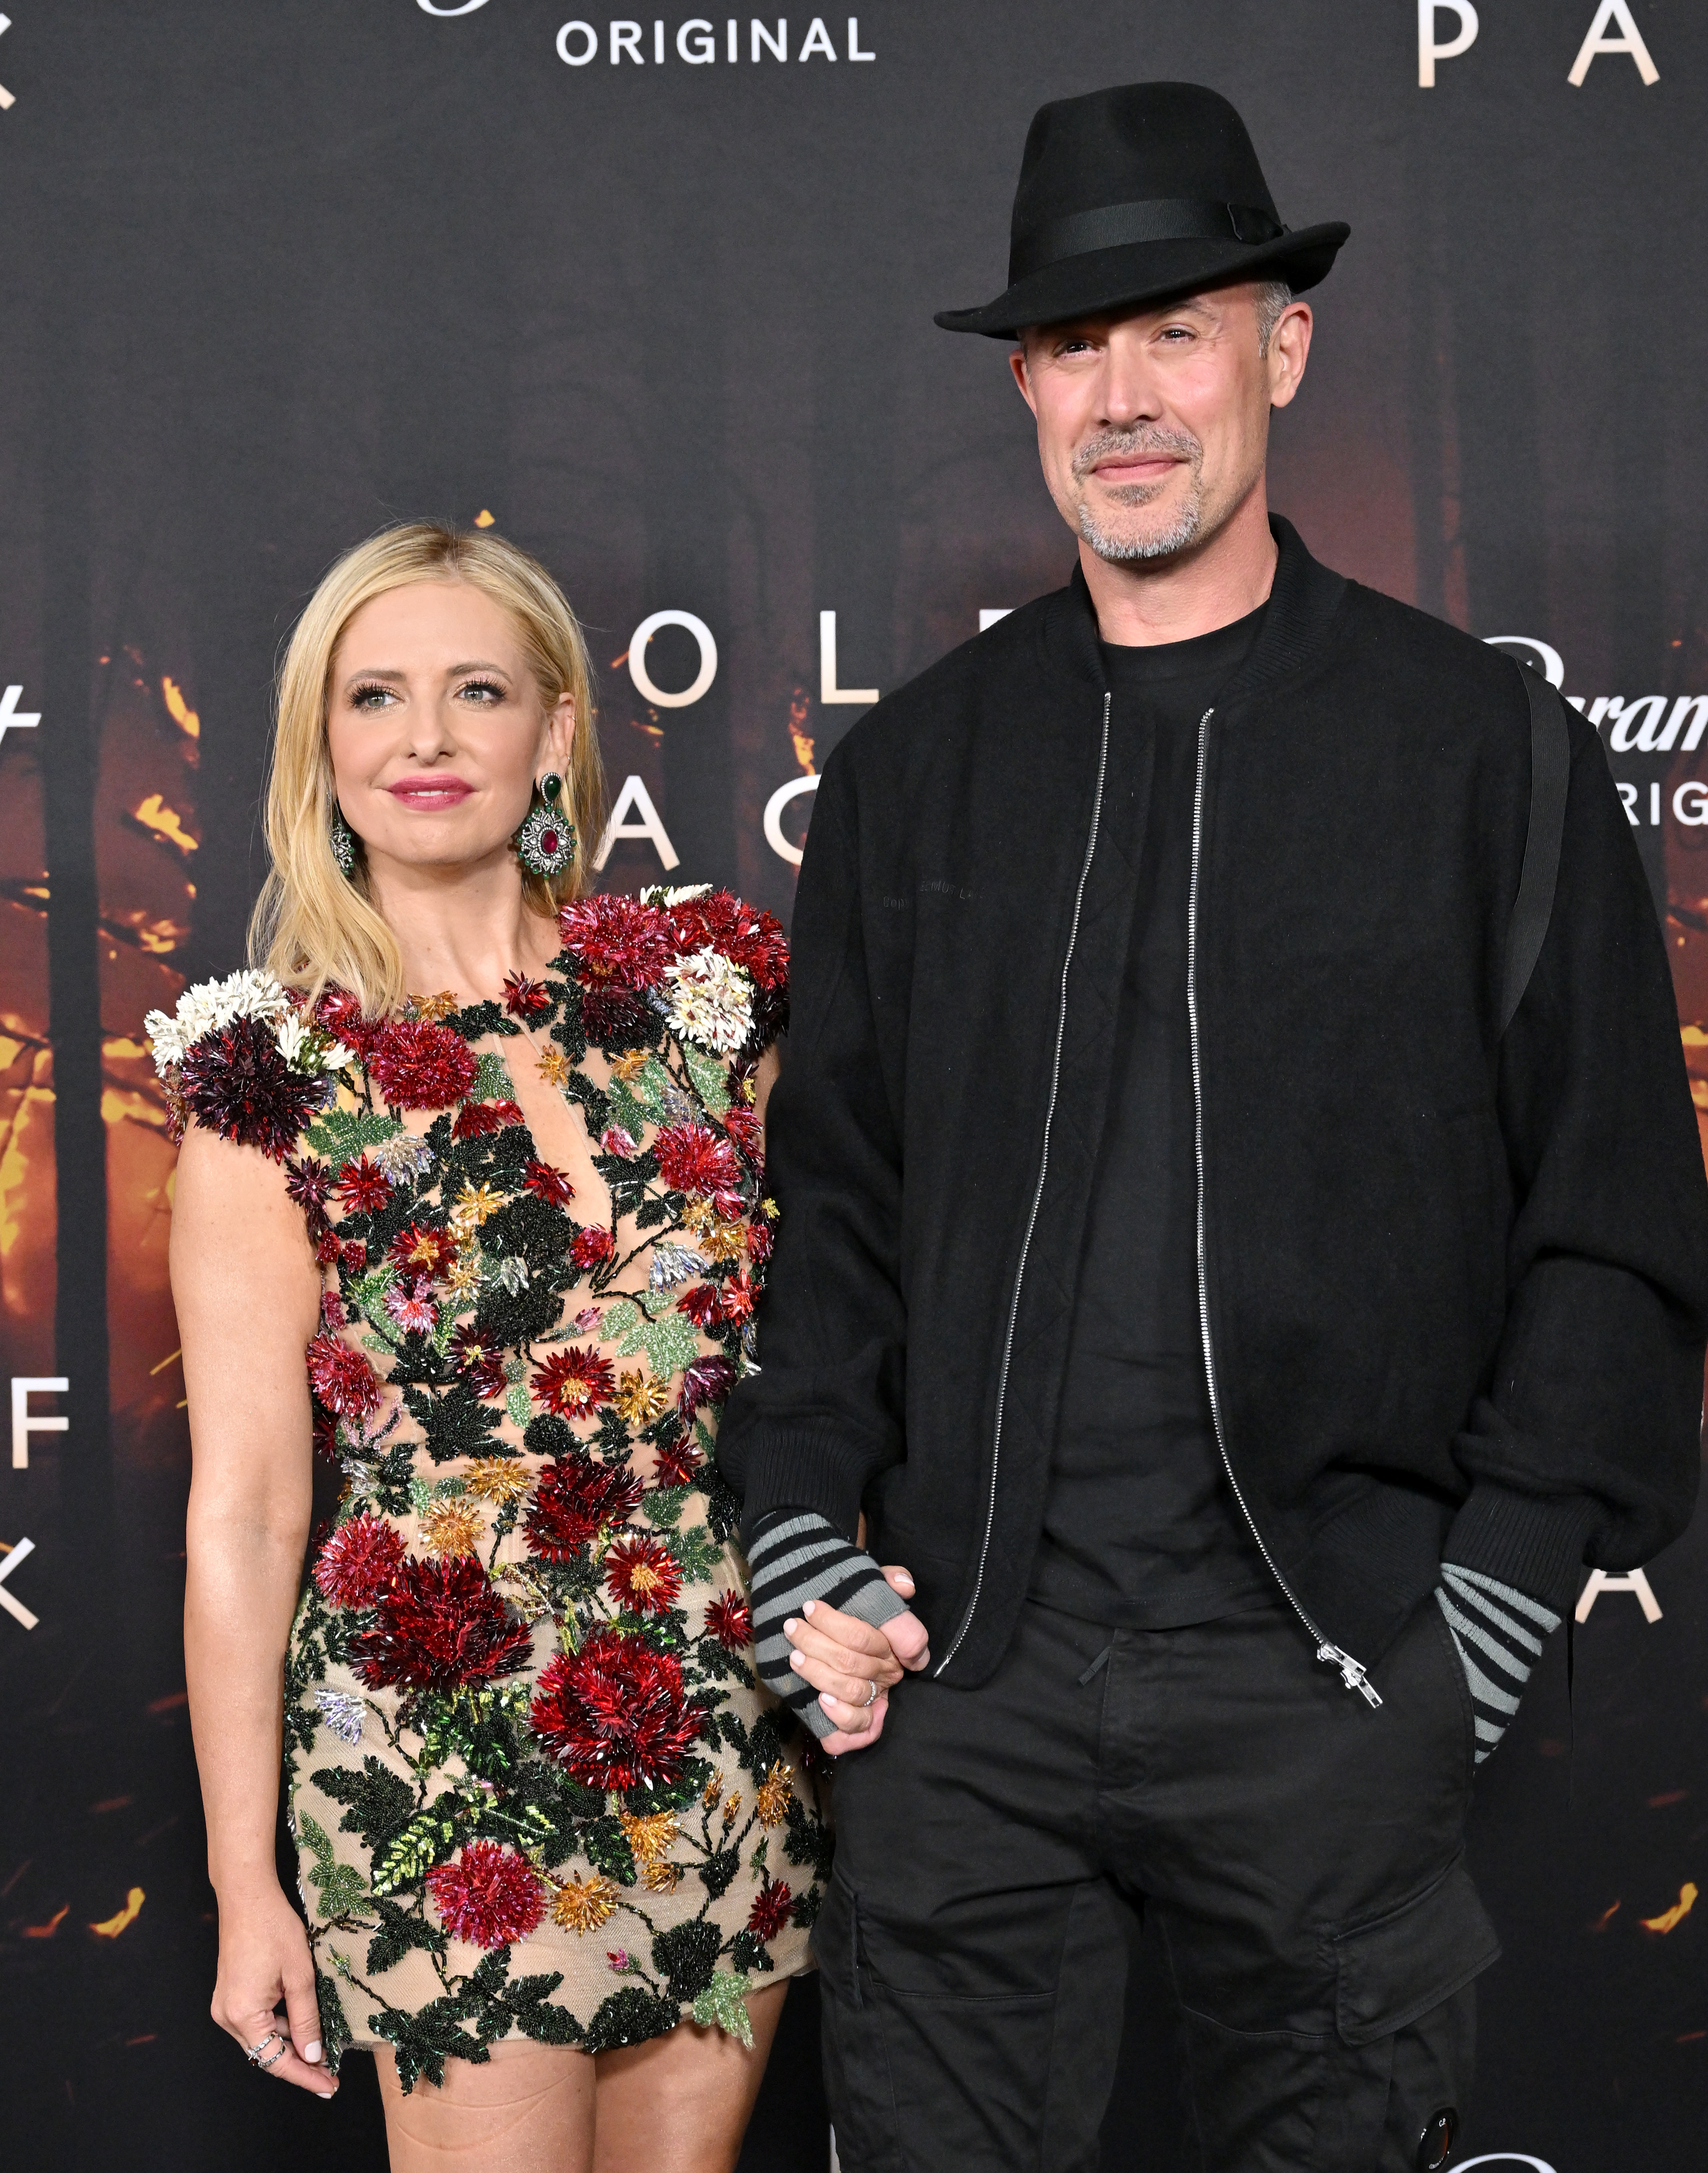 Two individuals posing together; one in a floral embellished dress and the other in a black outfit with a hat